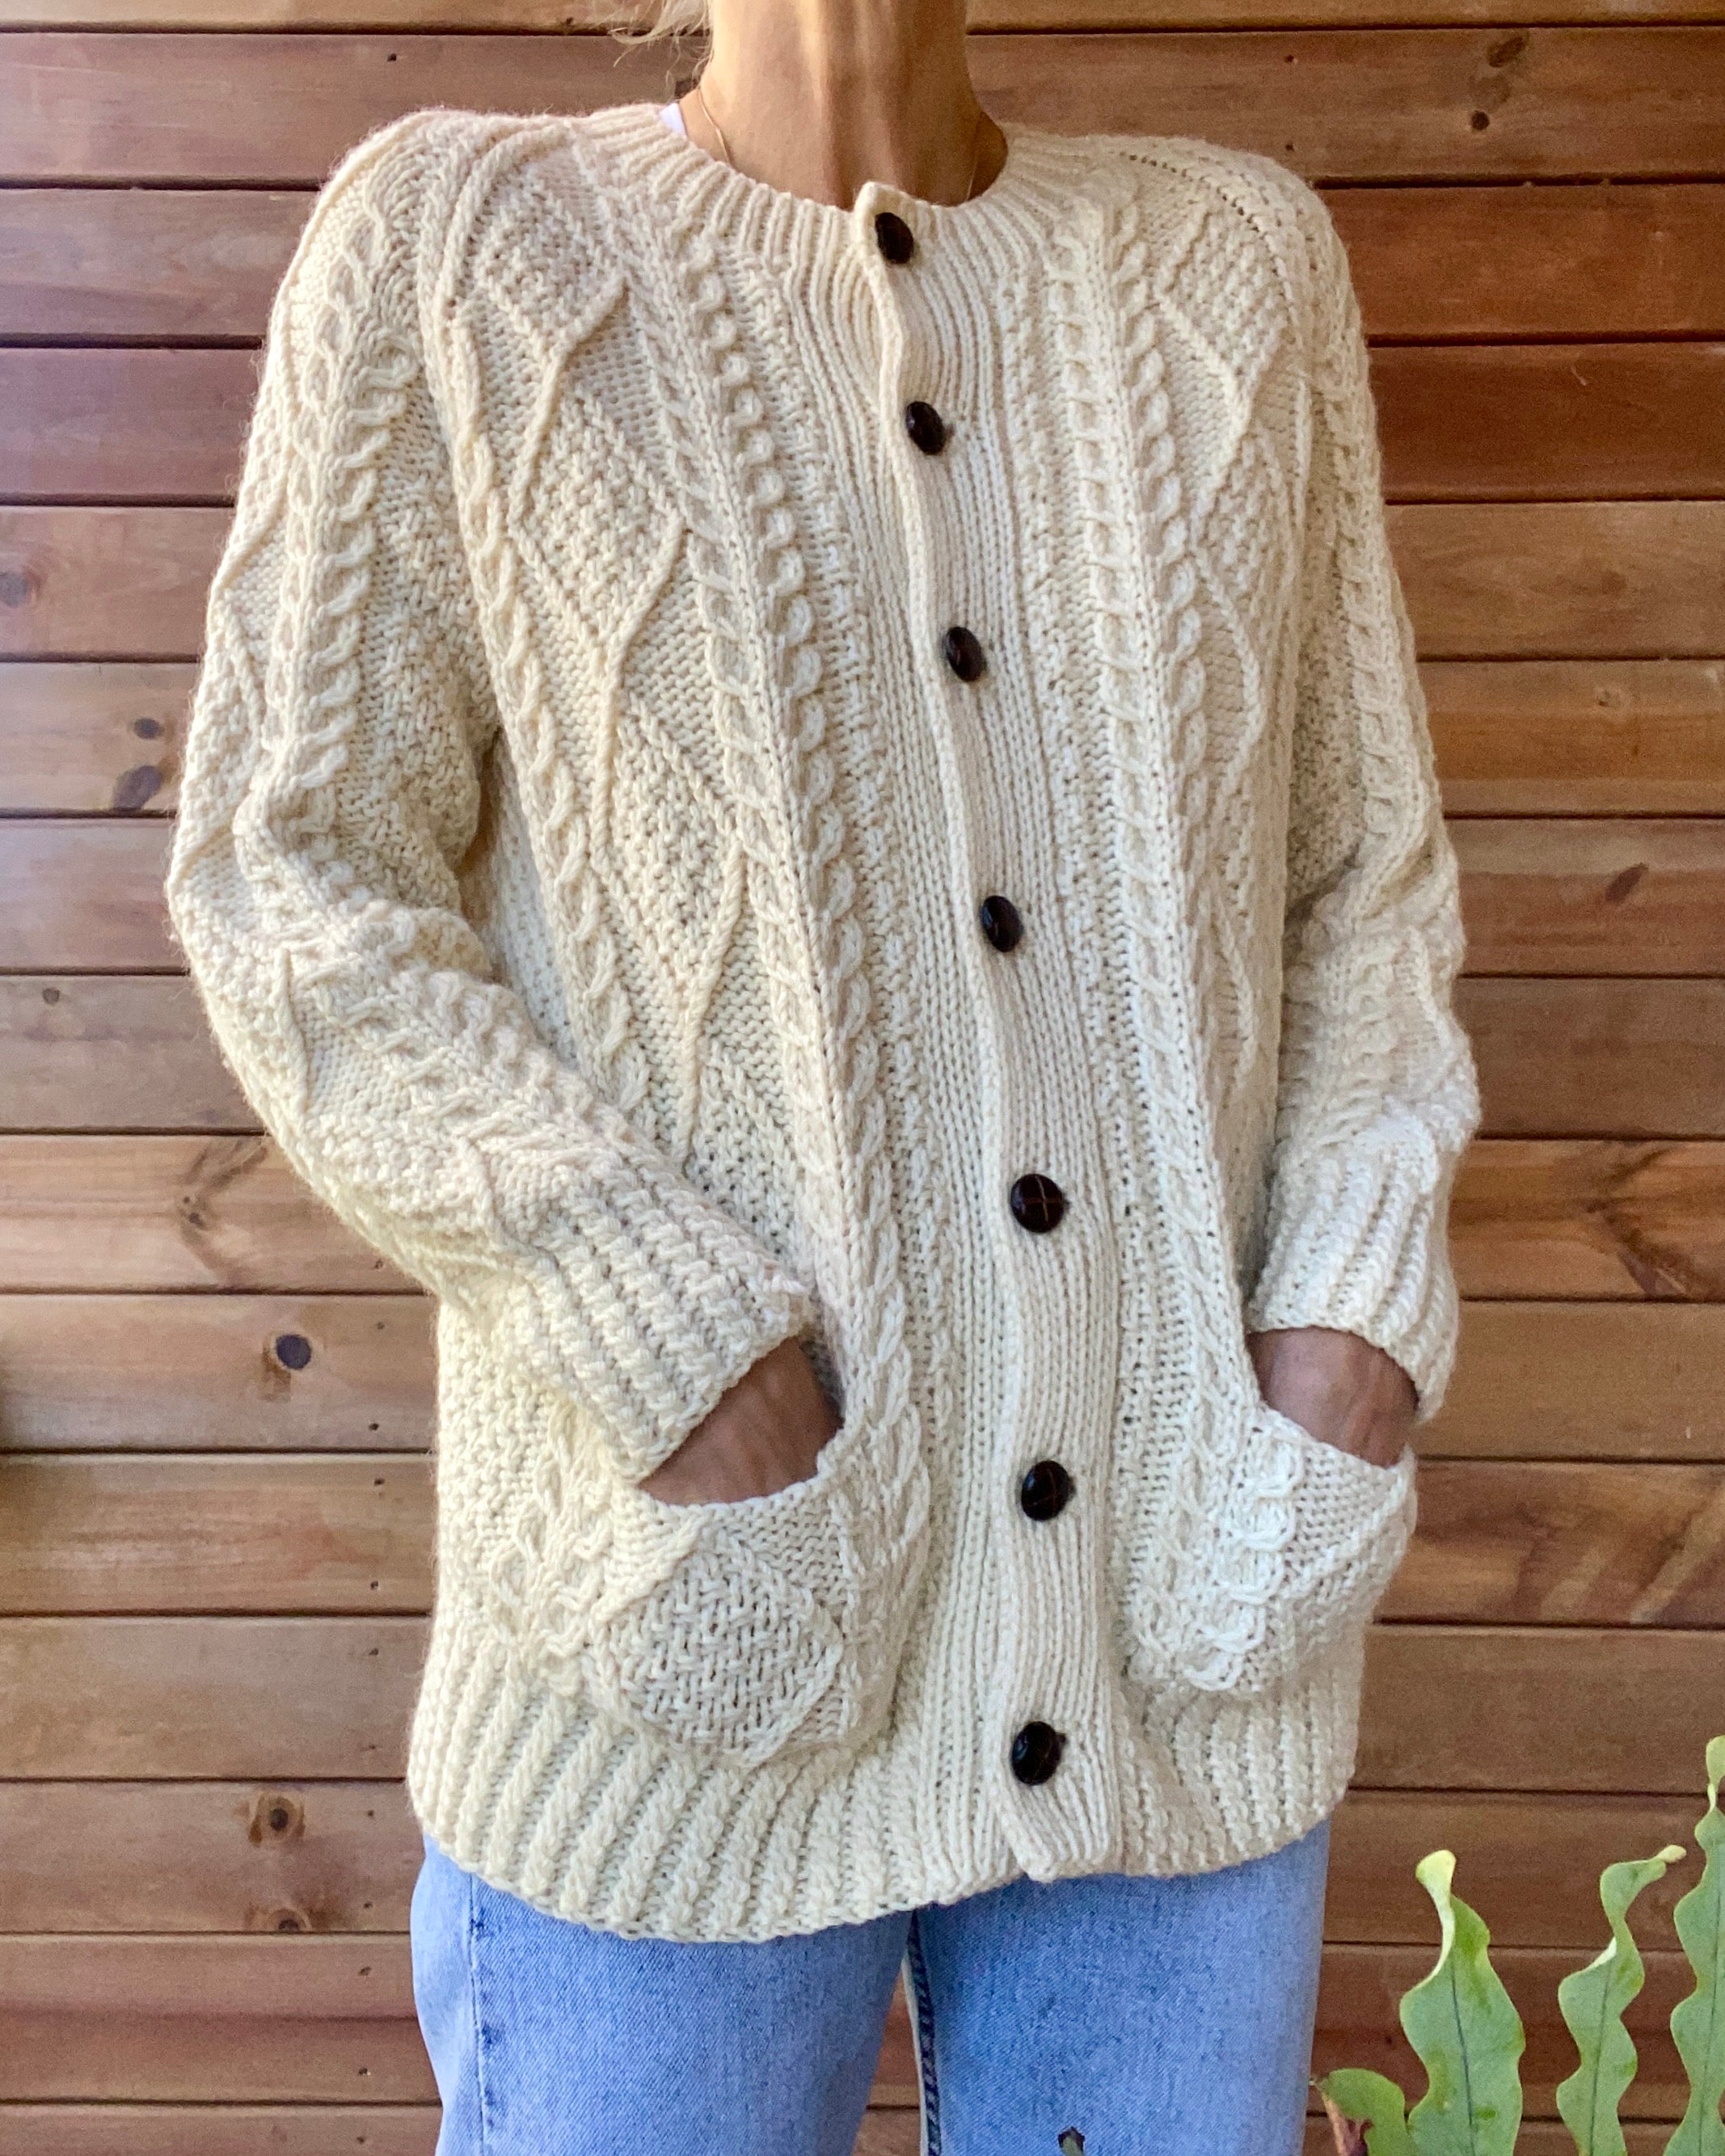 Vintage Handknit BROOKS BROTHERS Cable Fisherman Sweater Cardigan S M